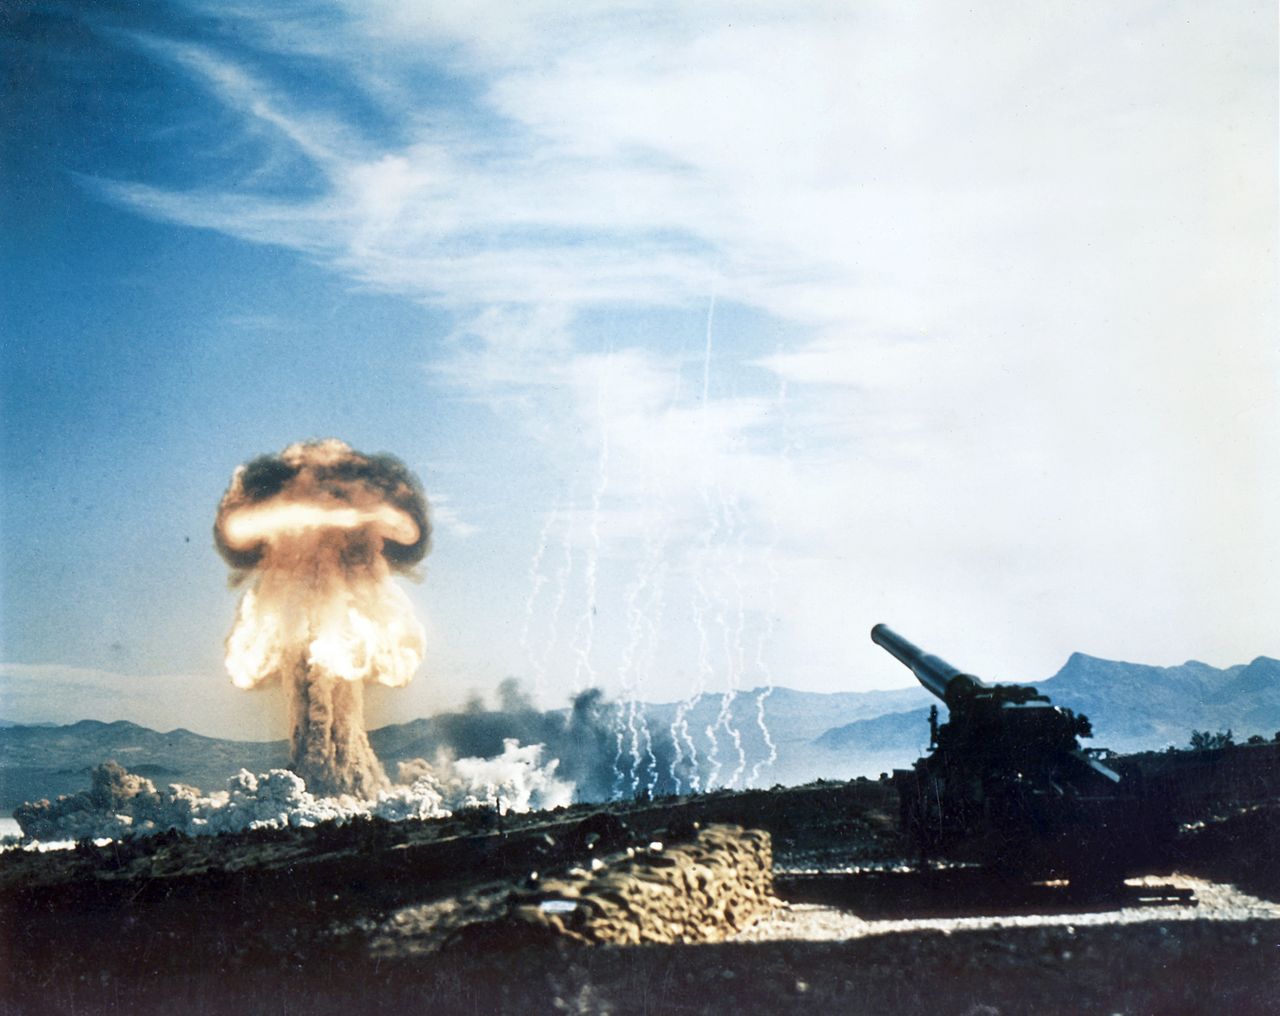 1280px-Nuclear_artillery_test_Grable_Event_-_Part_of_Operation_Upshot-Knothole.jpg